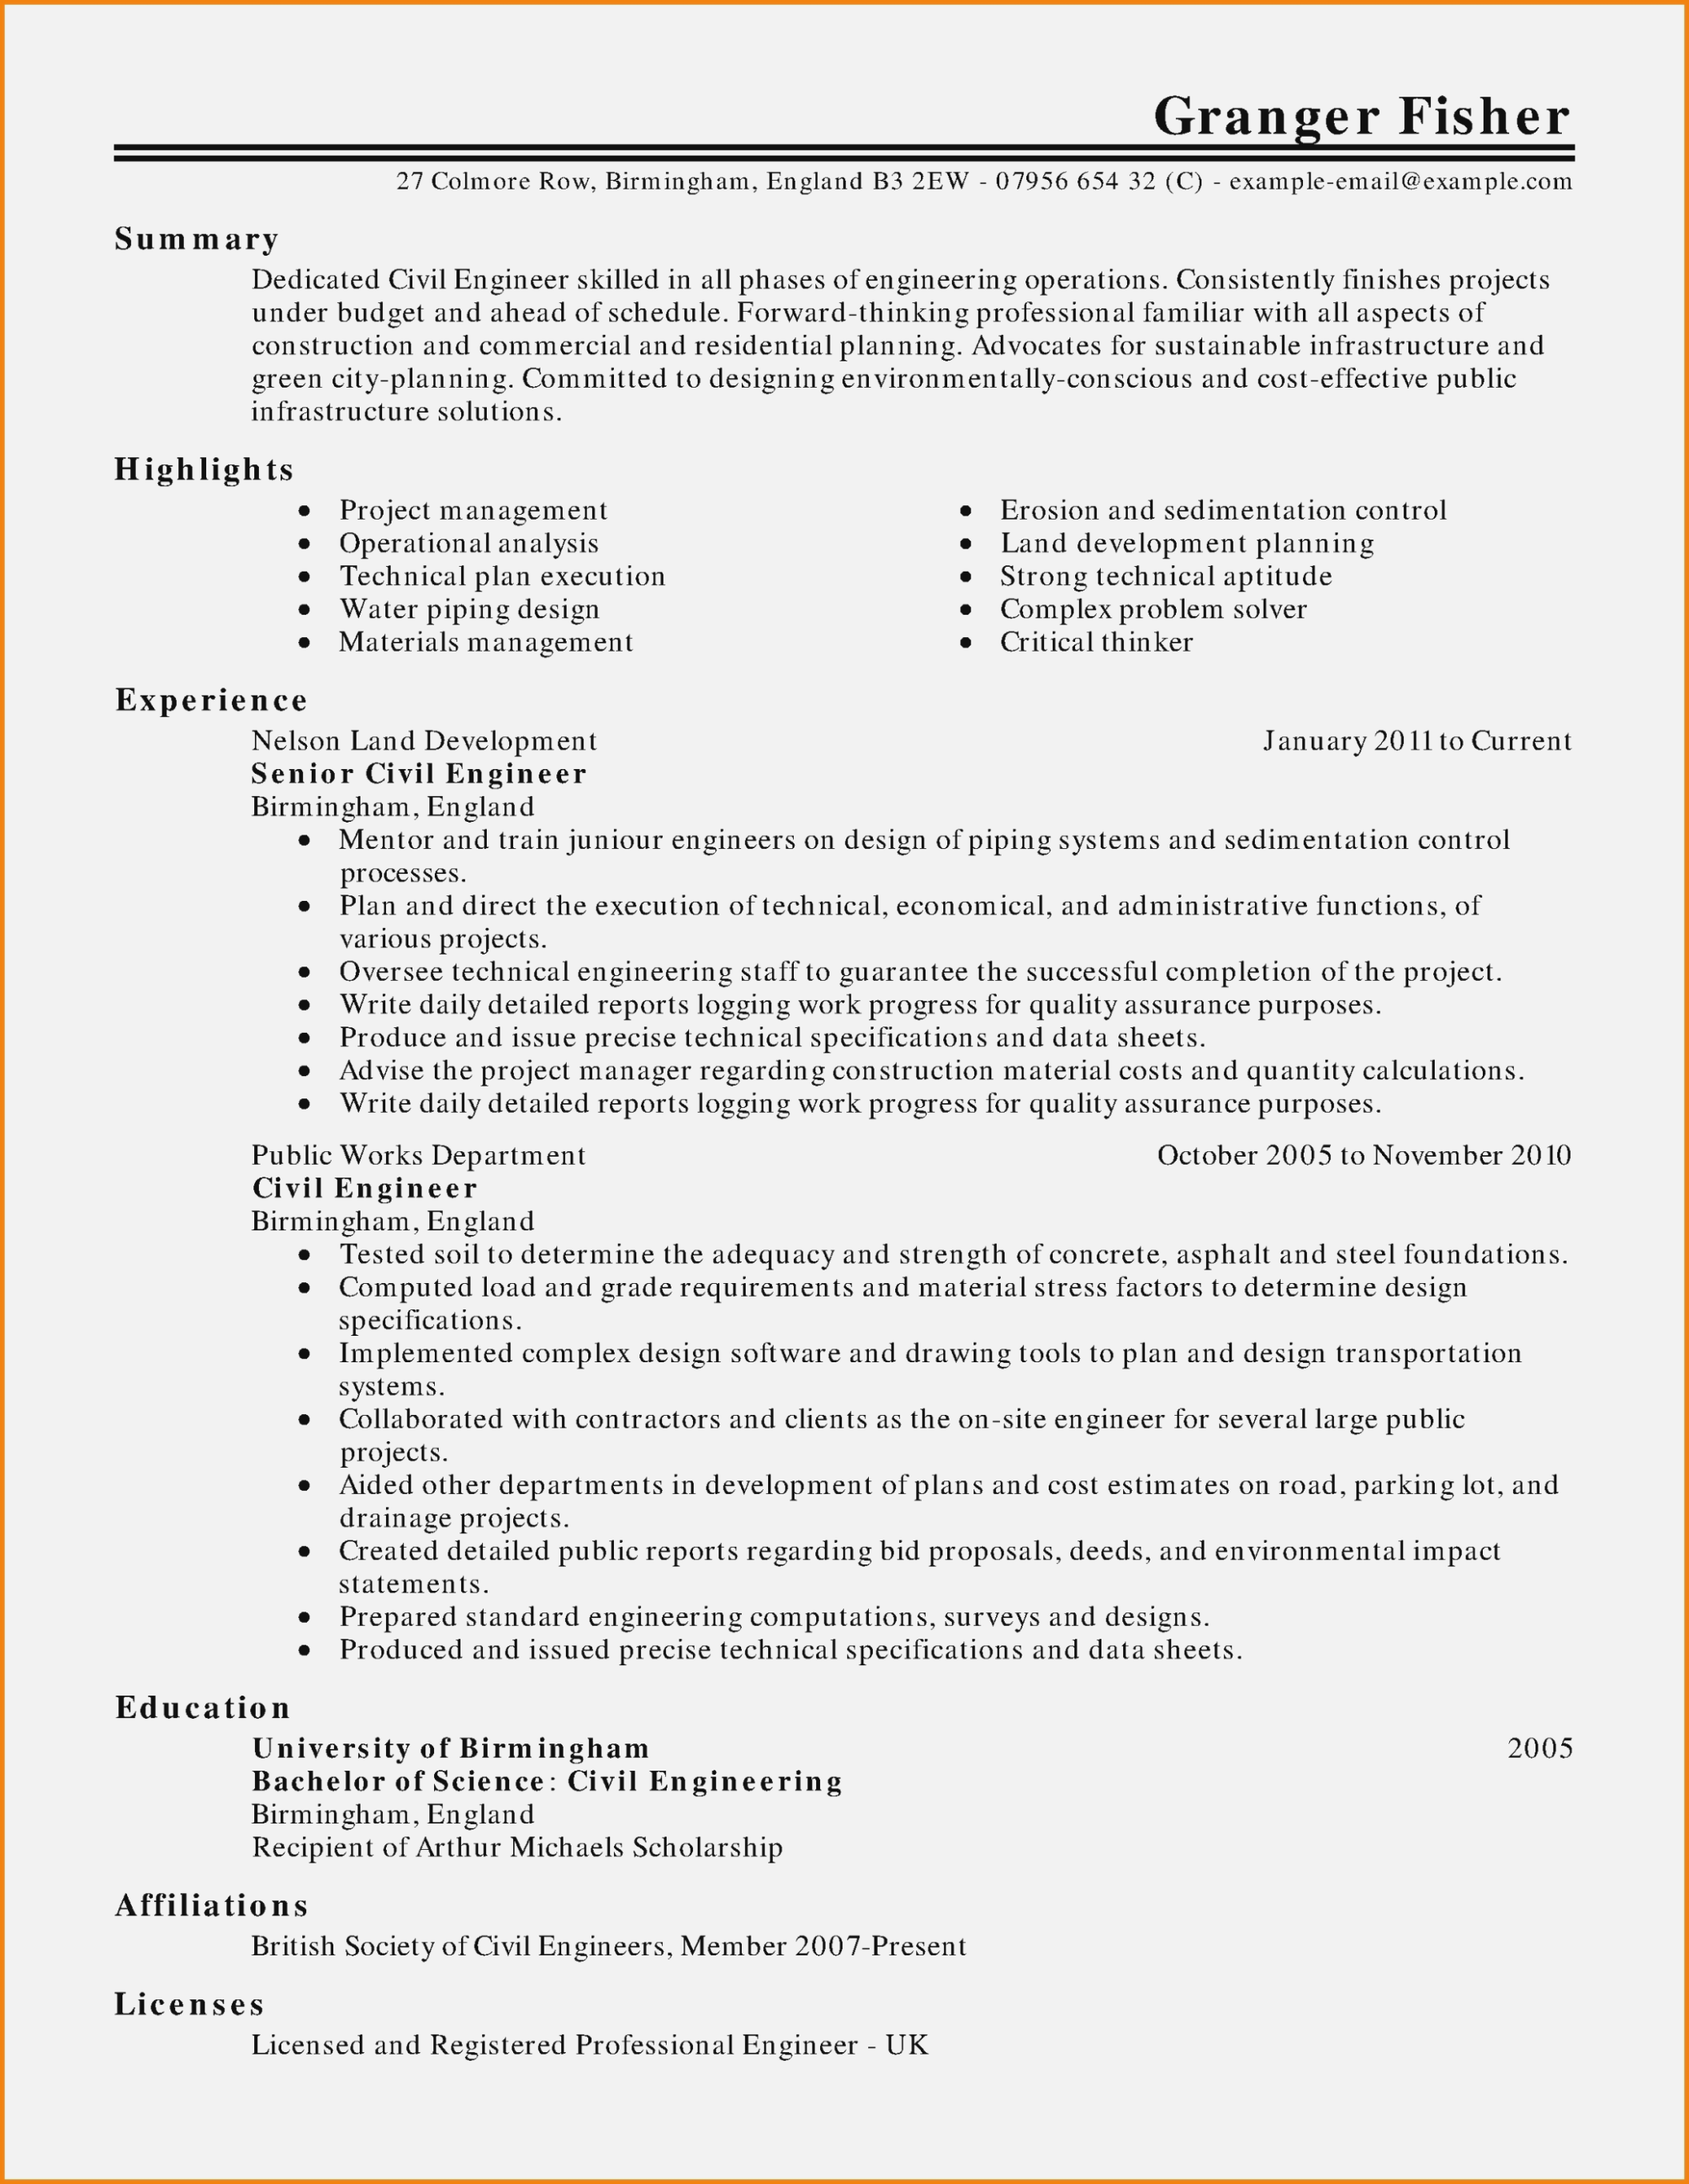 How To Spell Resume How To Spell Resume For Job Keni Candlecomfortzone Com How Do You Spell Resume how to spell resume|wikiresume.com